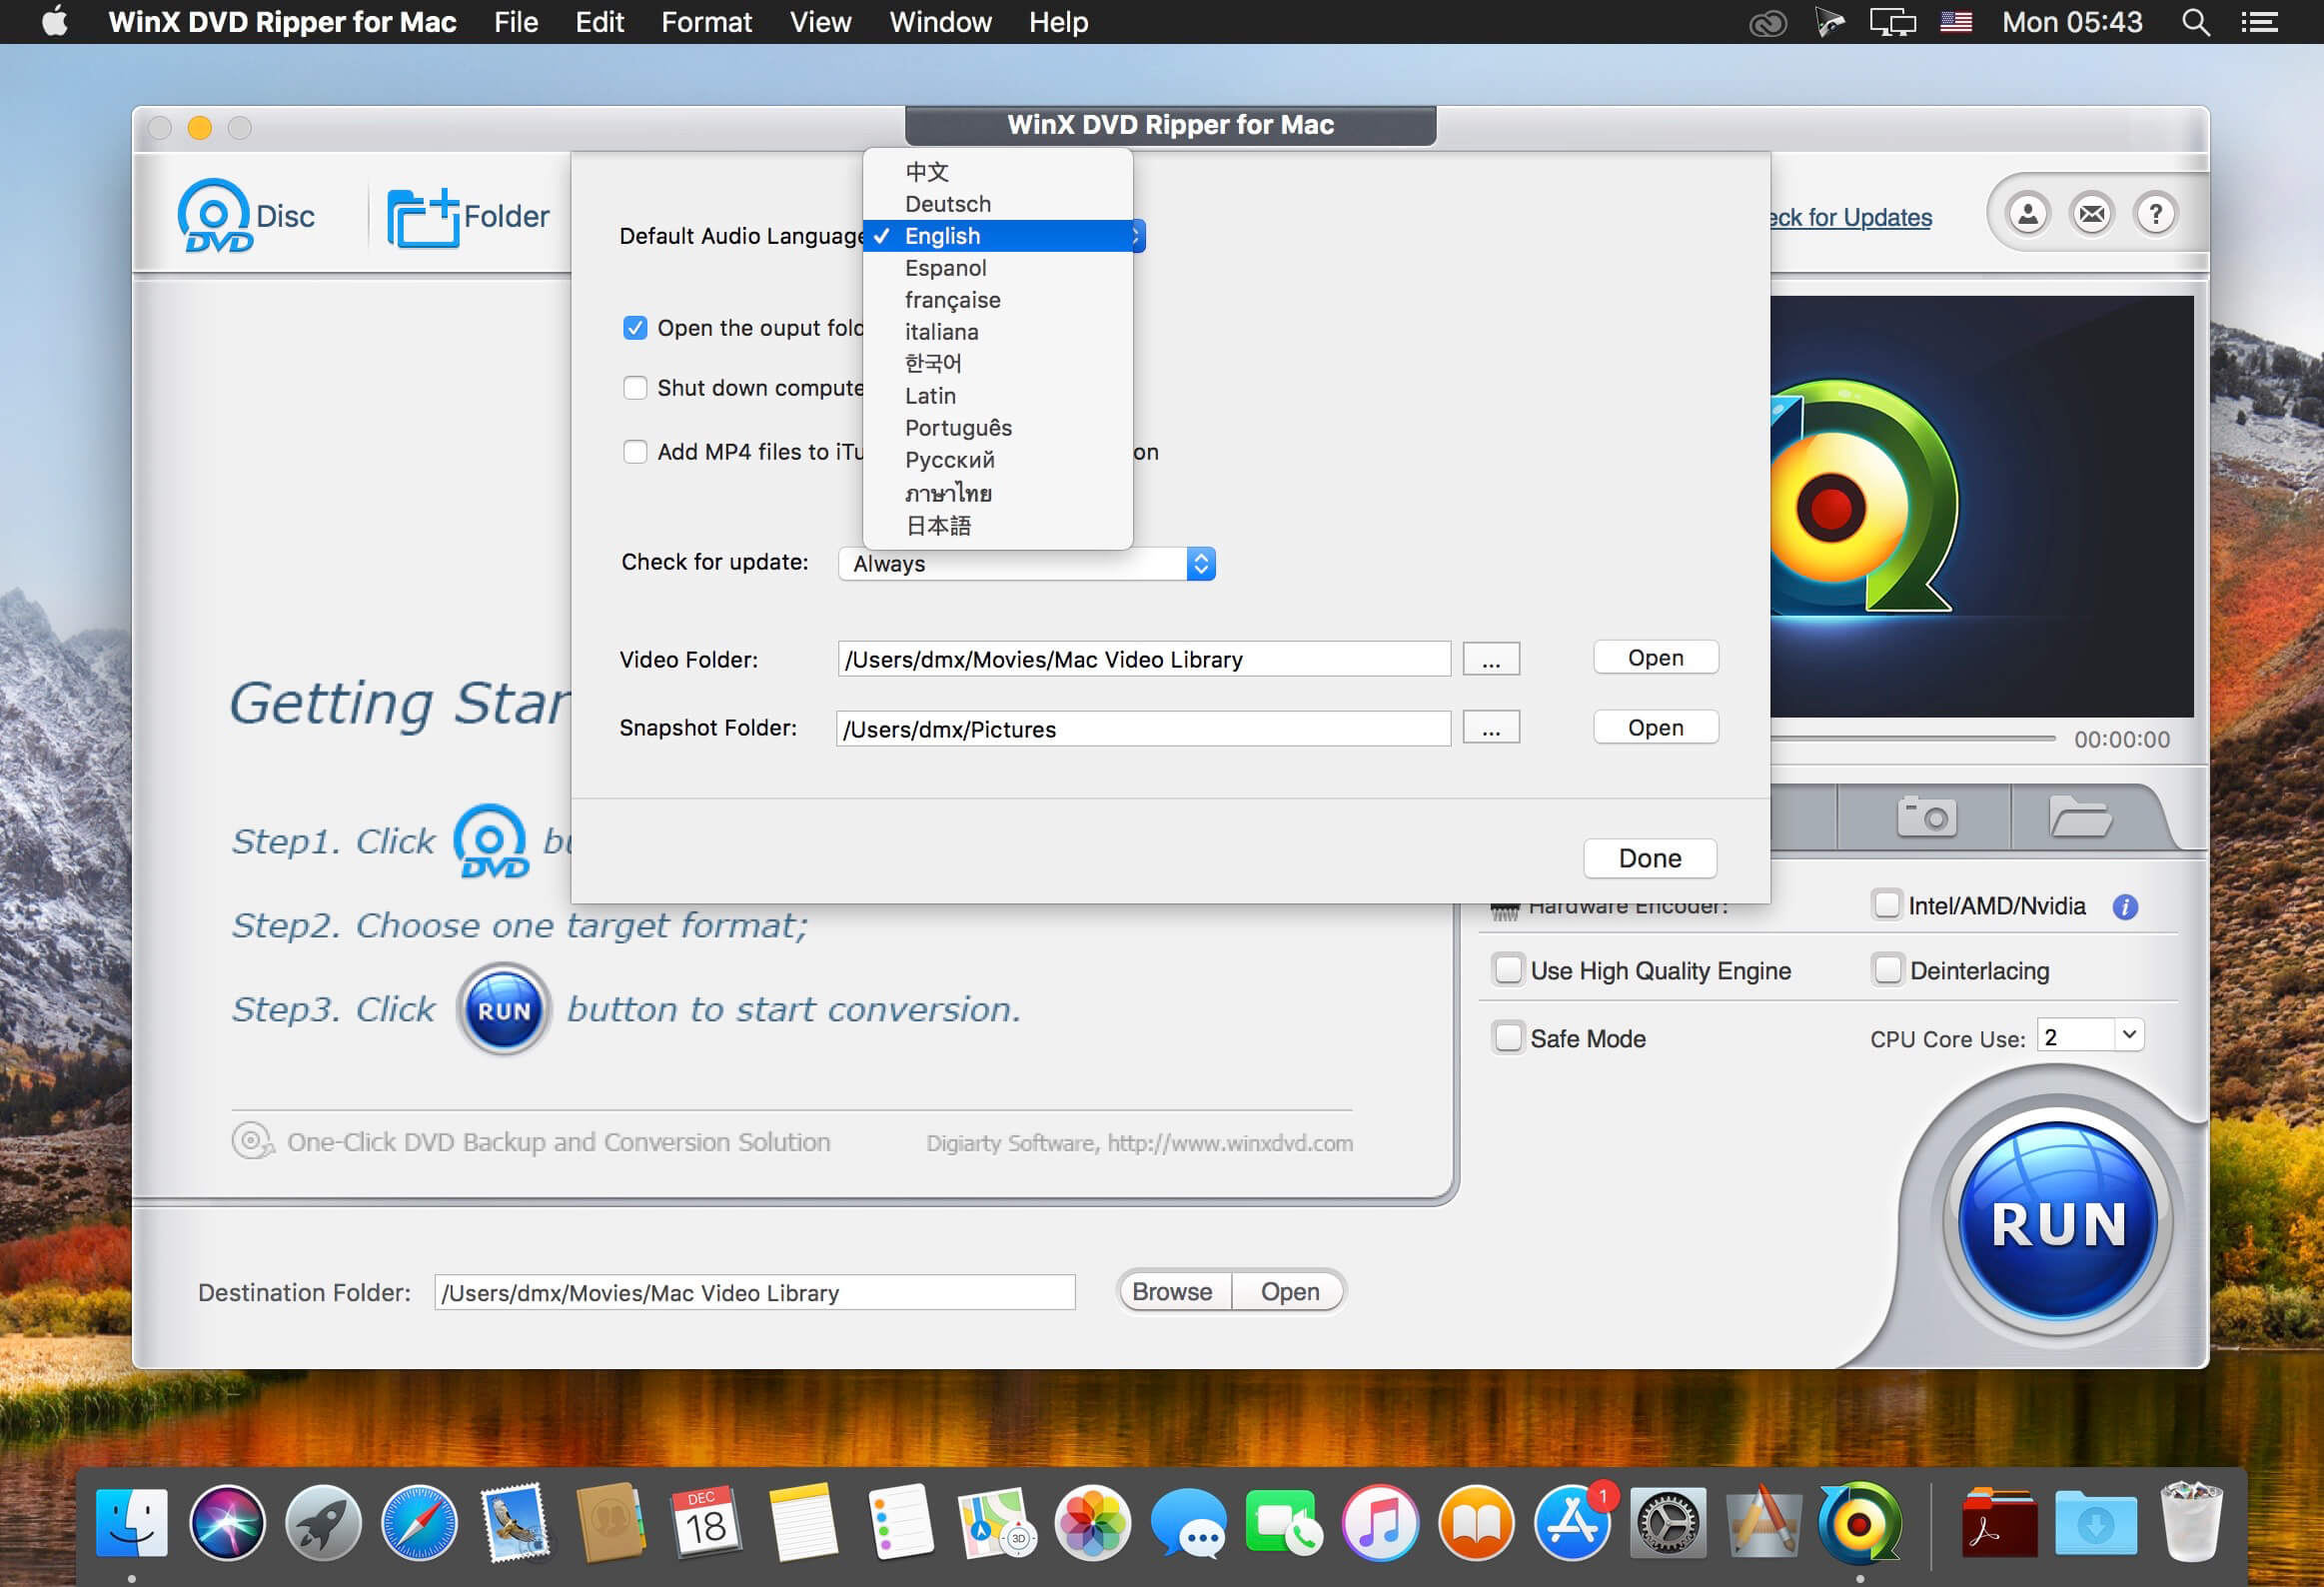 download the last version for apple EdgeView 4